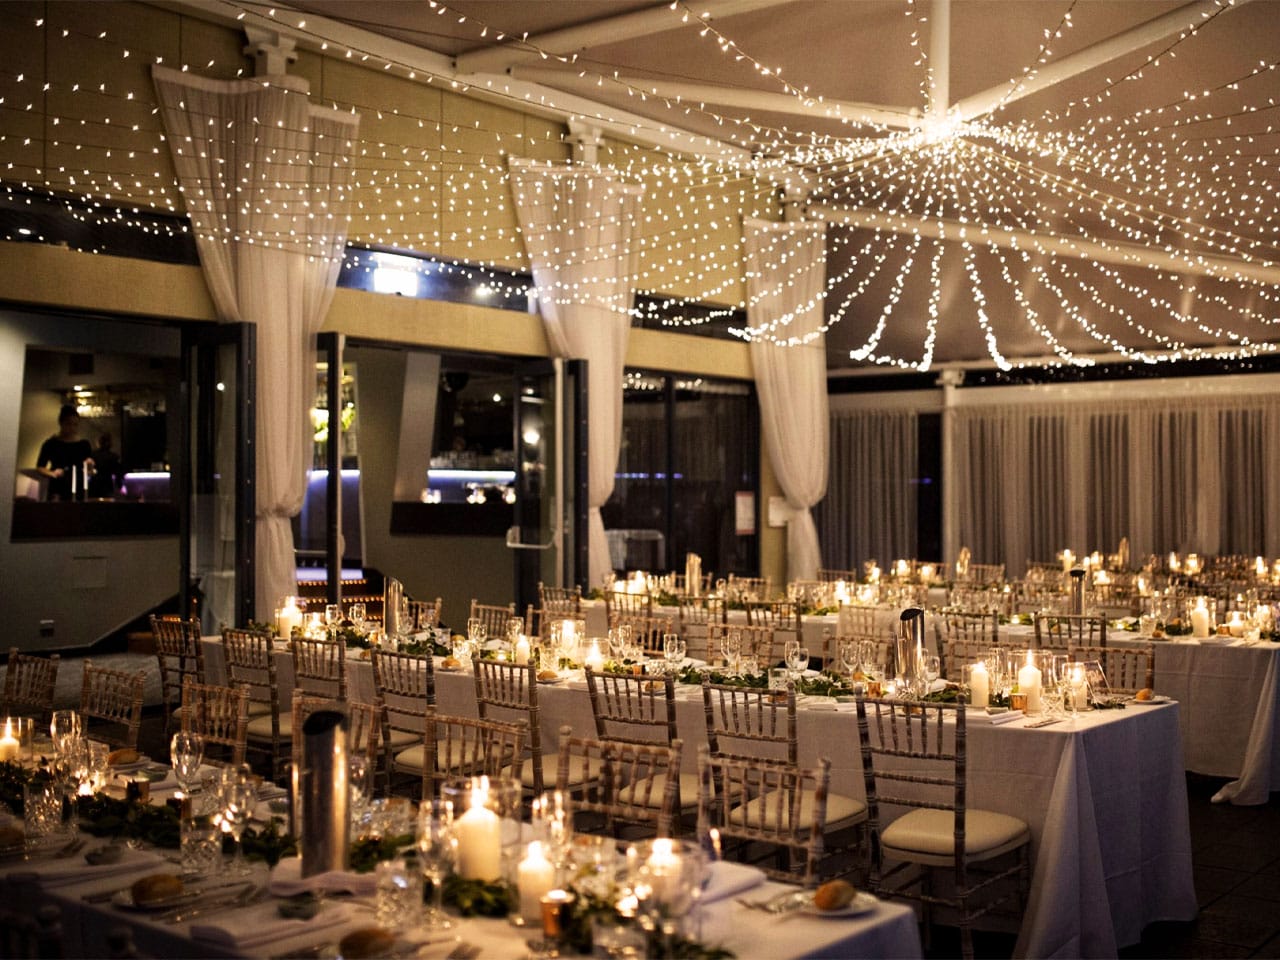 Long Tables With Chairs And String Lights Inside The Function Room